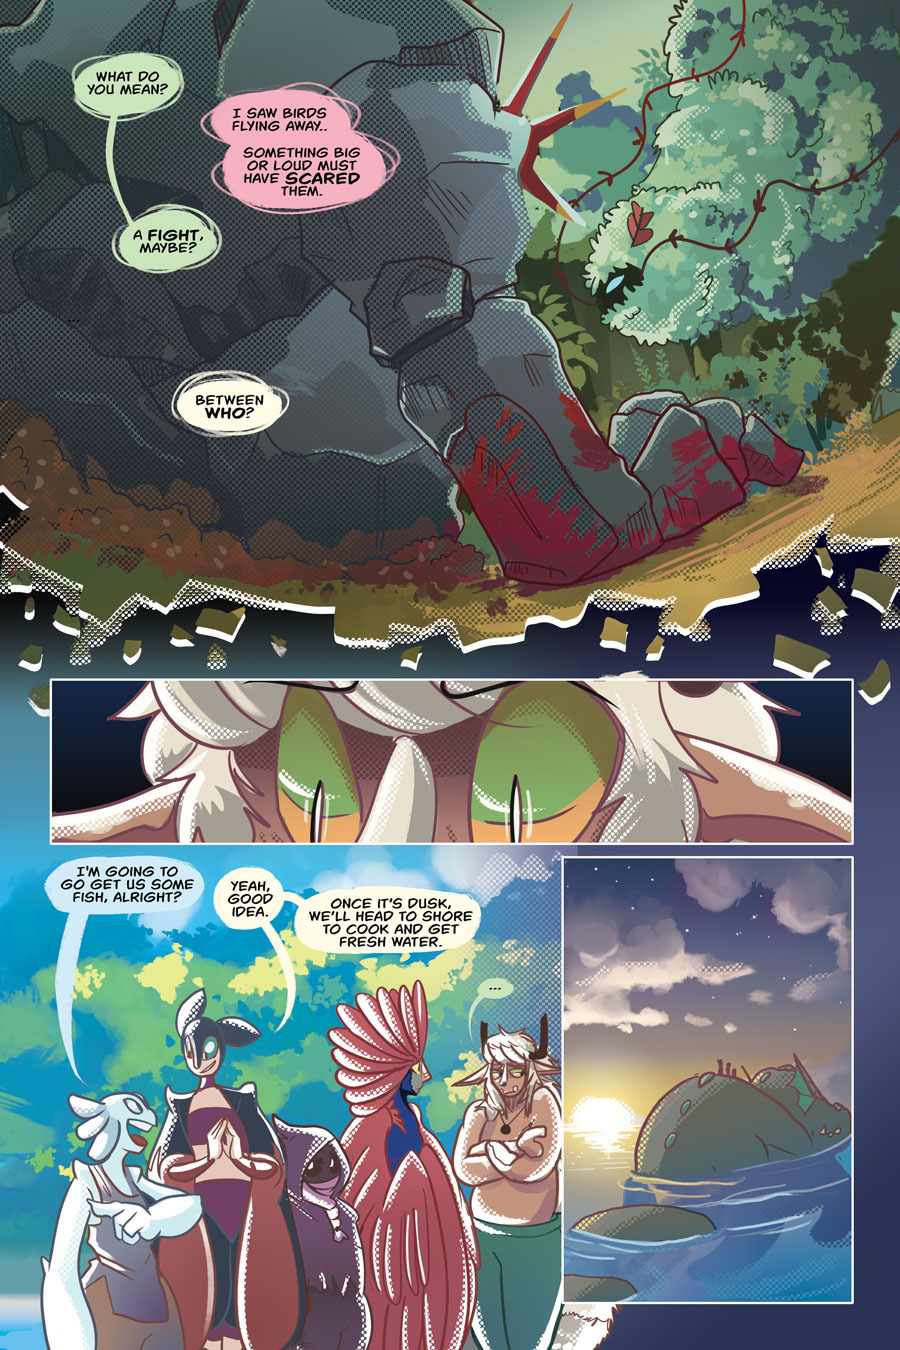 Gone Fishing 006, page 14